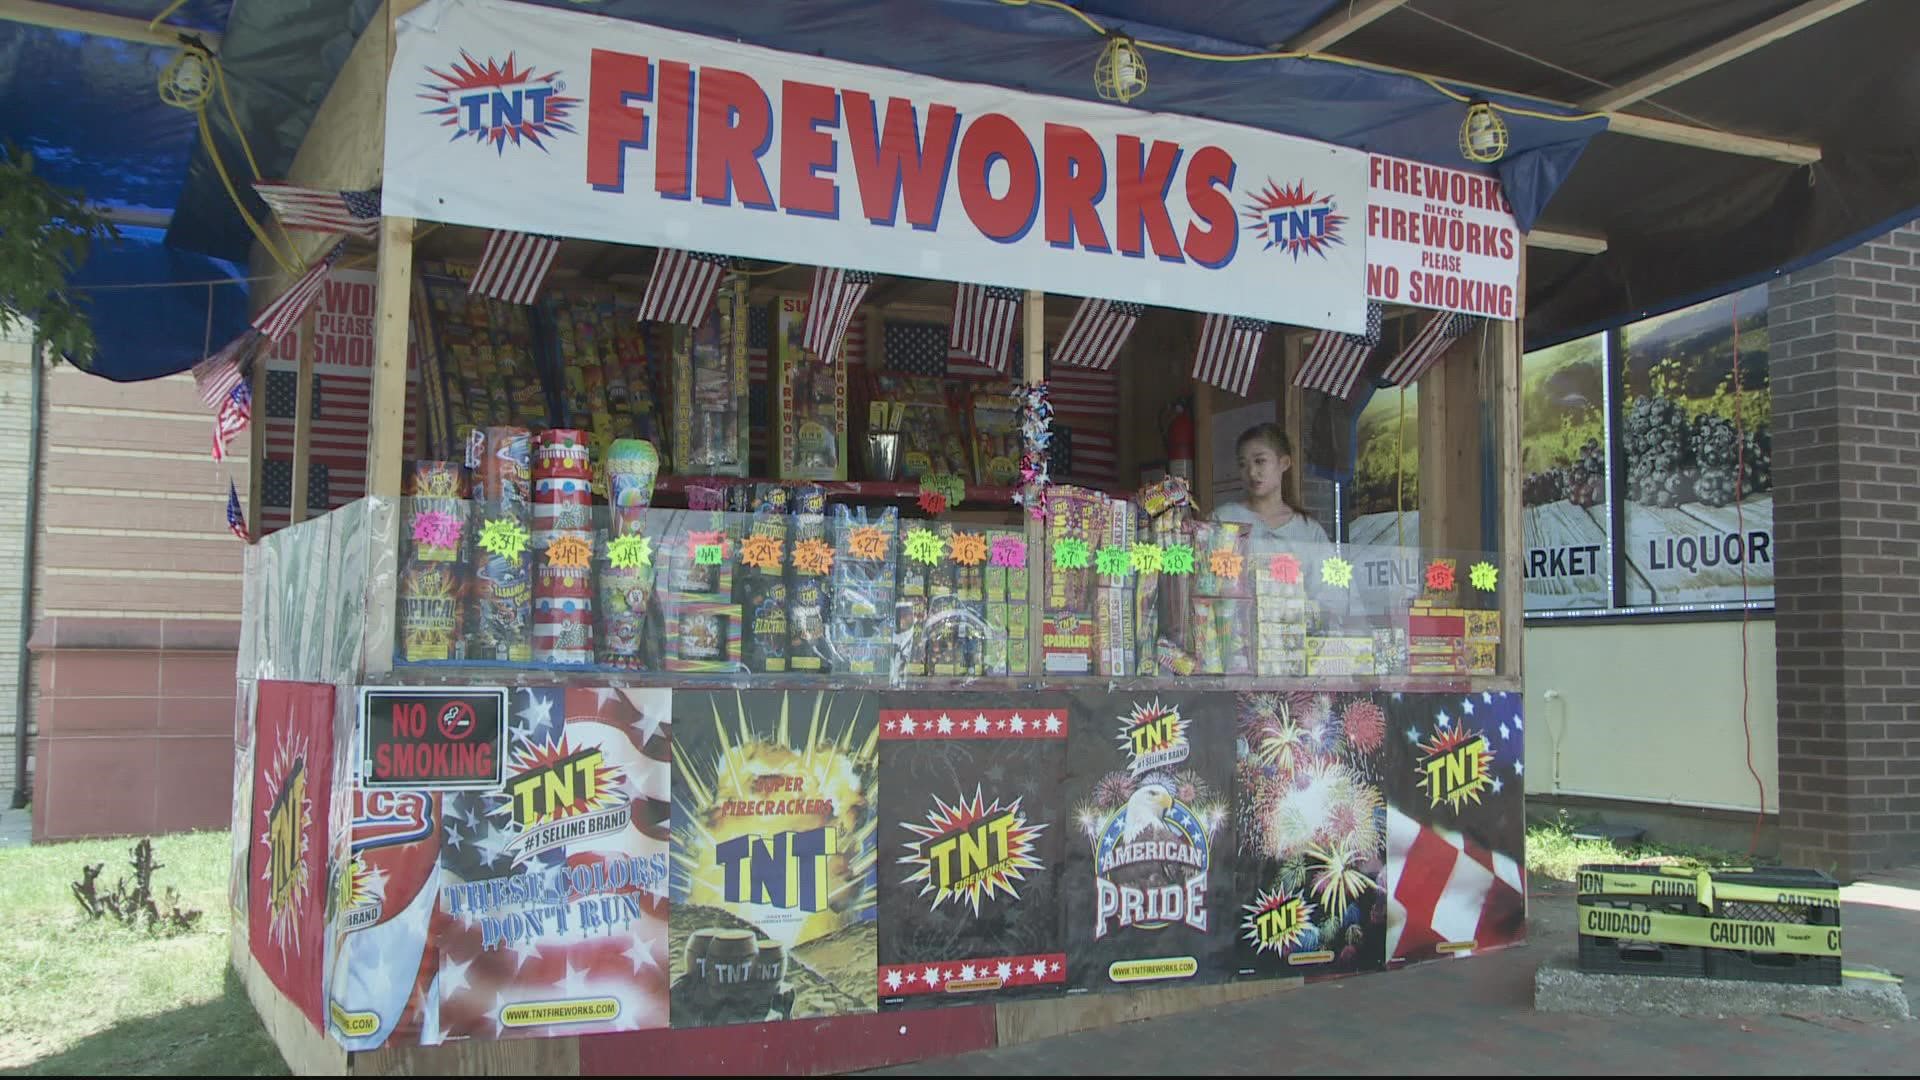 Towns have started cancelling their fireworks shows. Including Vienna, Virginia and College Park, Maryland.